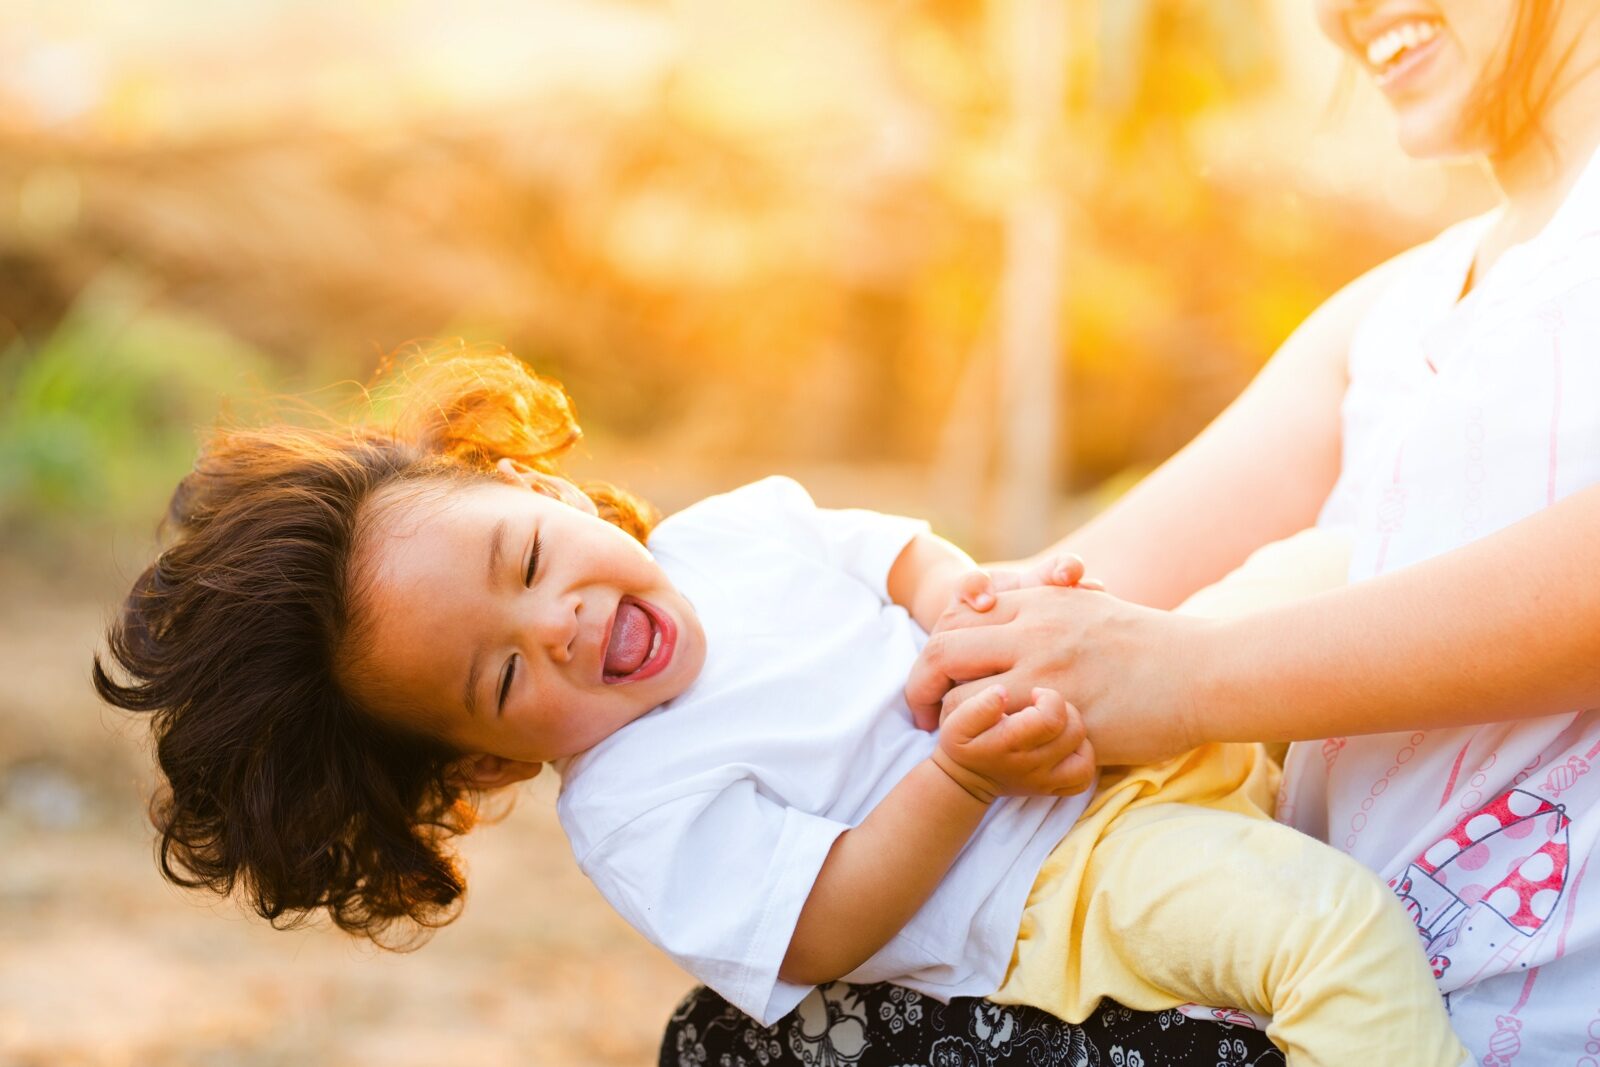 Laughing child leaning back on woman's knee